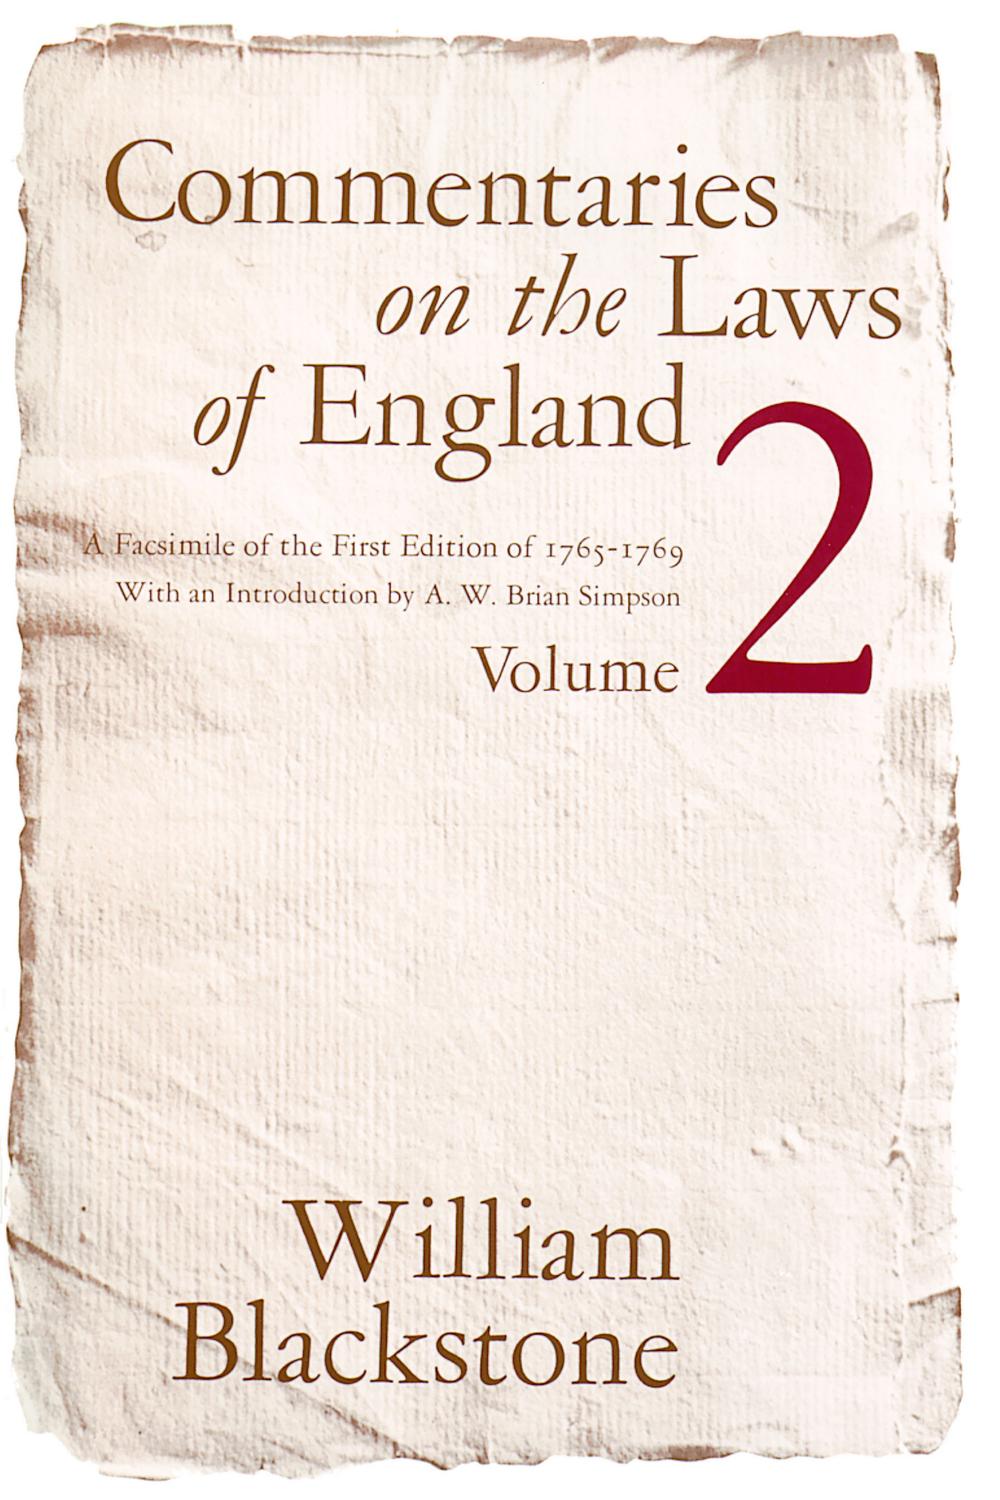 Commentaries on the Laws of England, Volume 2 - William Blackstone